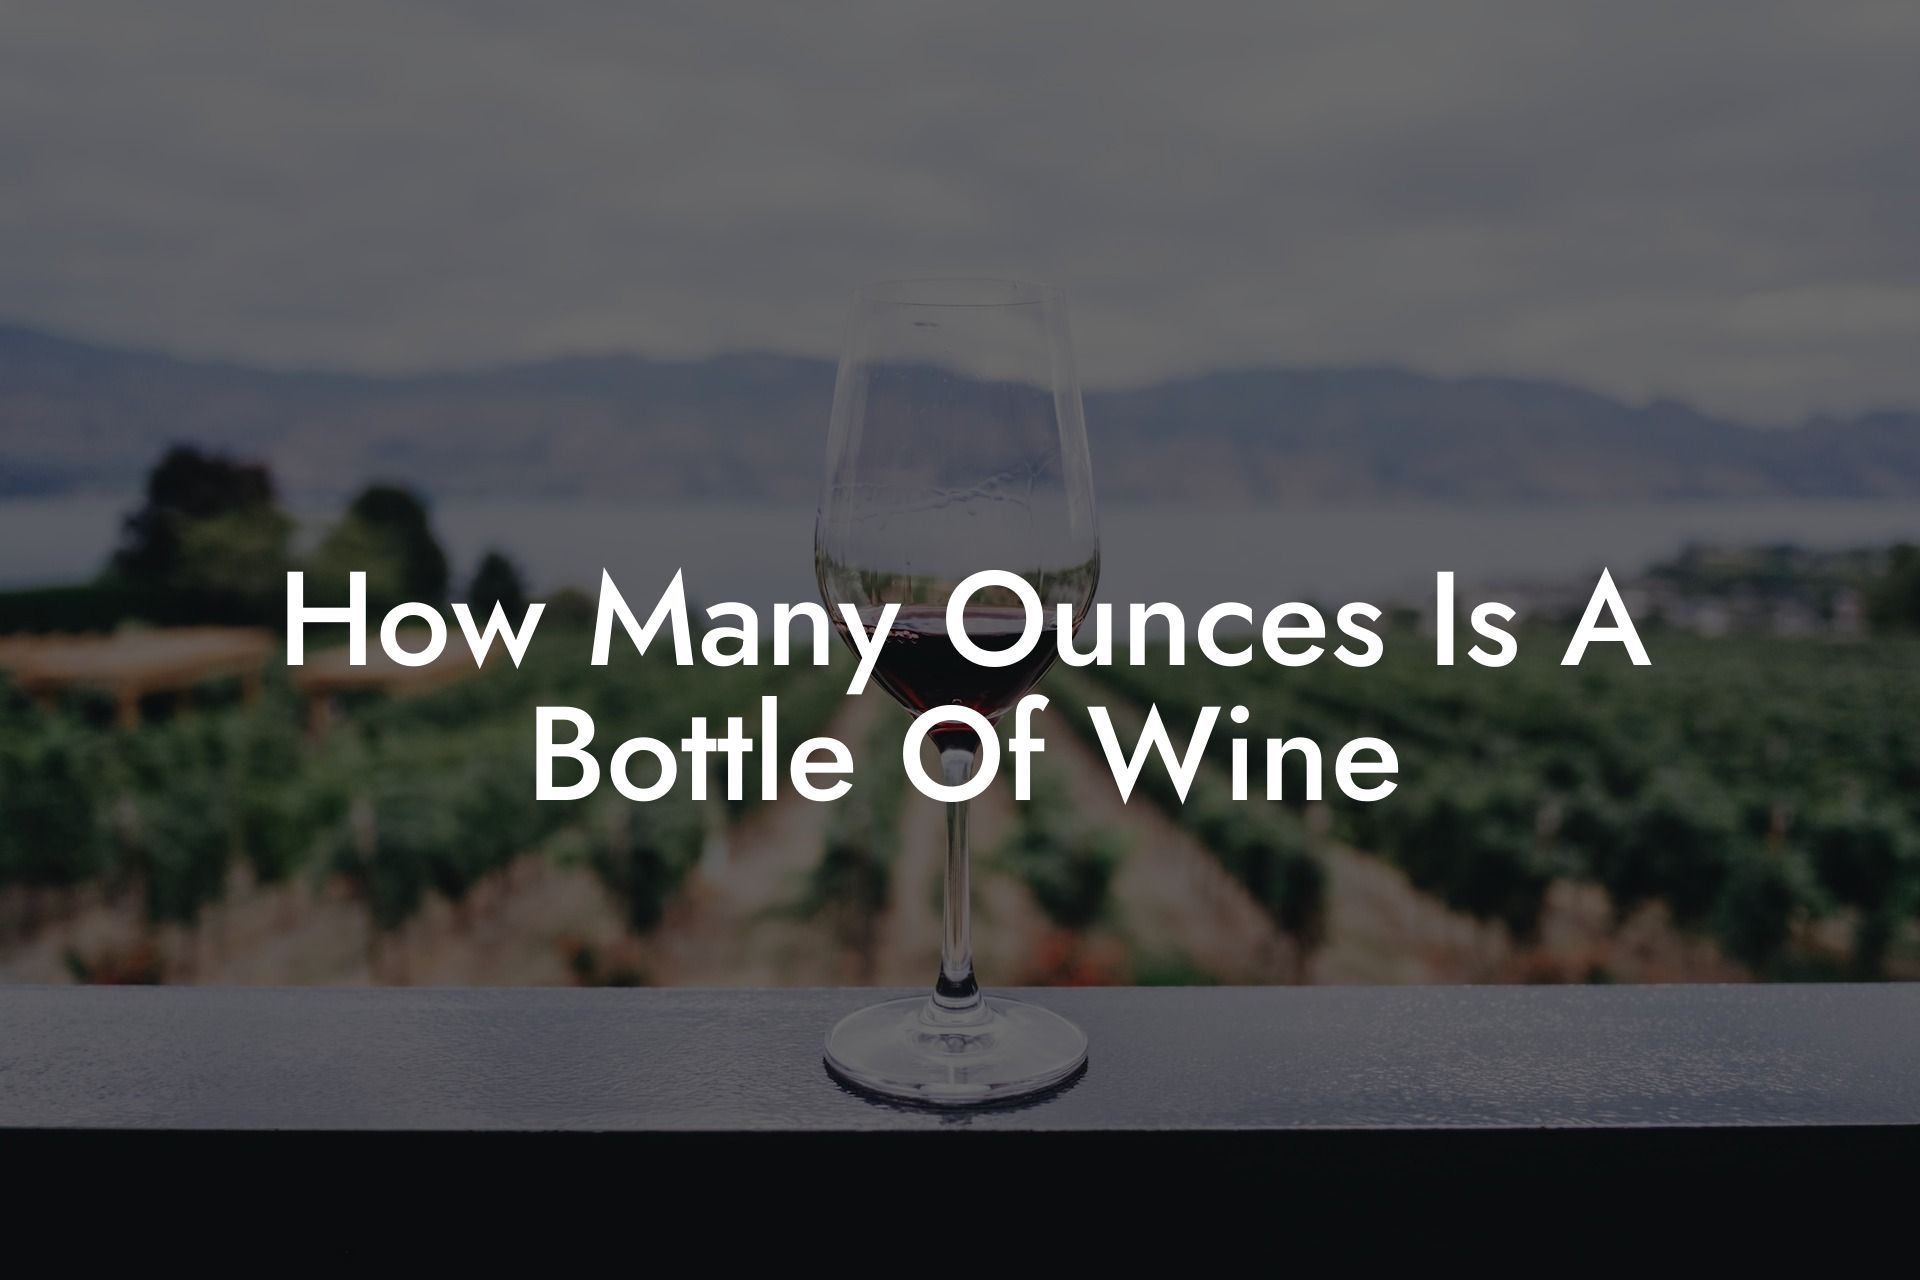 How Many Ounces Is A Bottle Of Wine